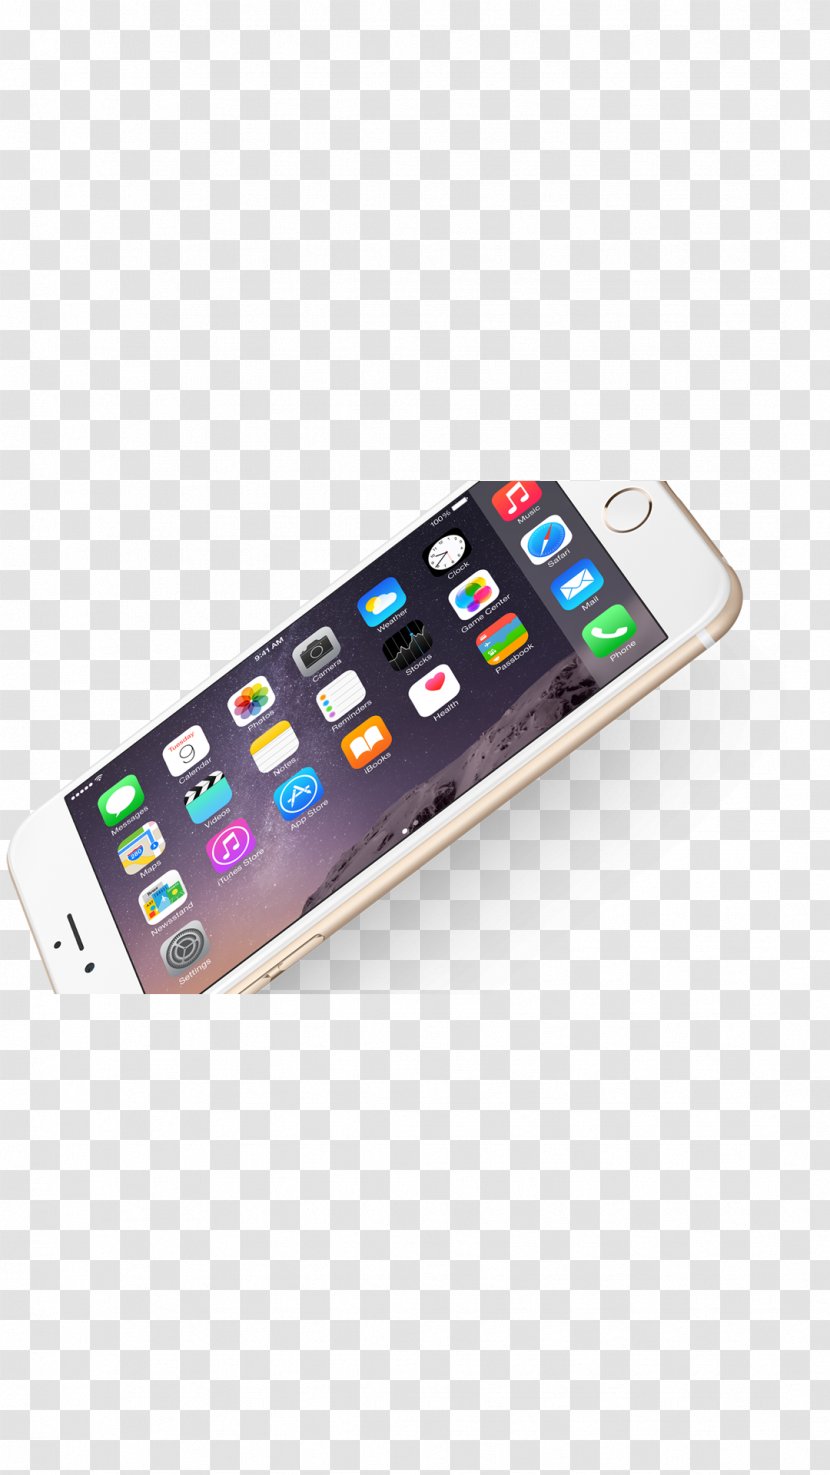 IPhone 6 Plus 4 6S Apple - Iphone - Mobile Phone Products In Kind 14 0 1 Transparent PNG